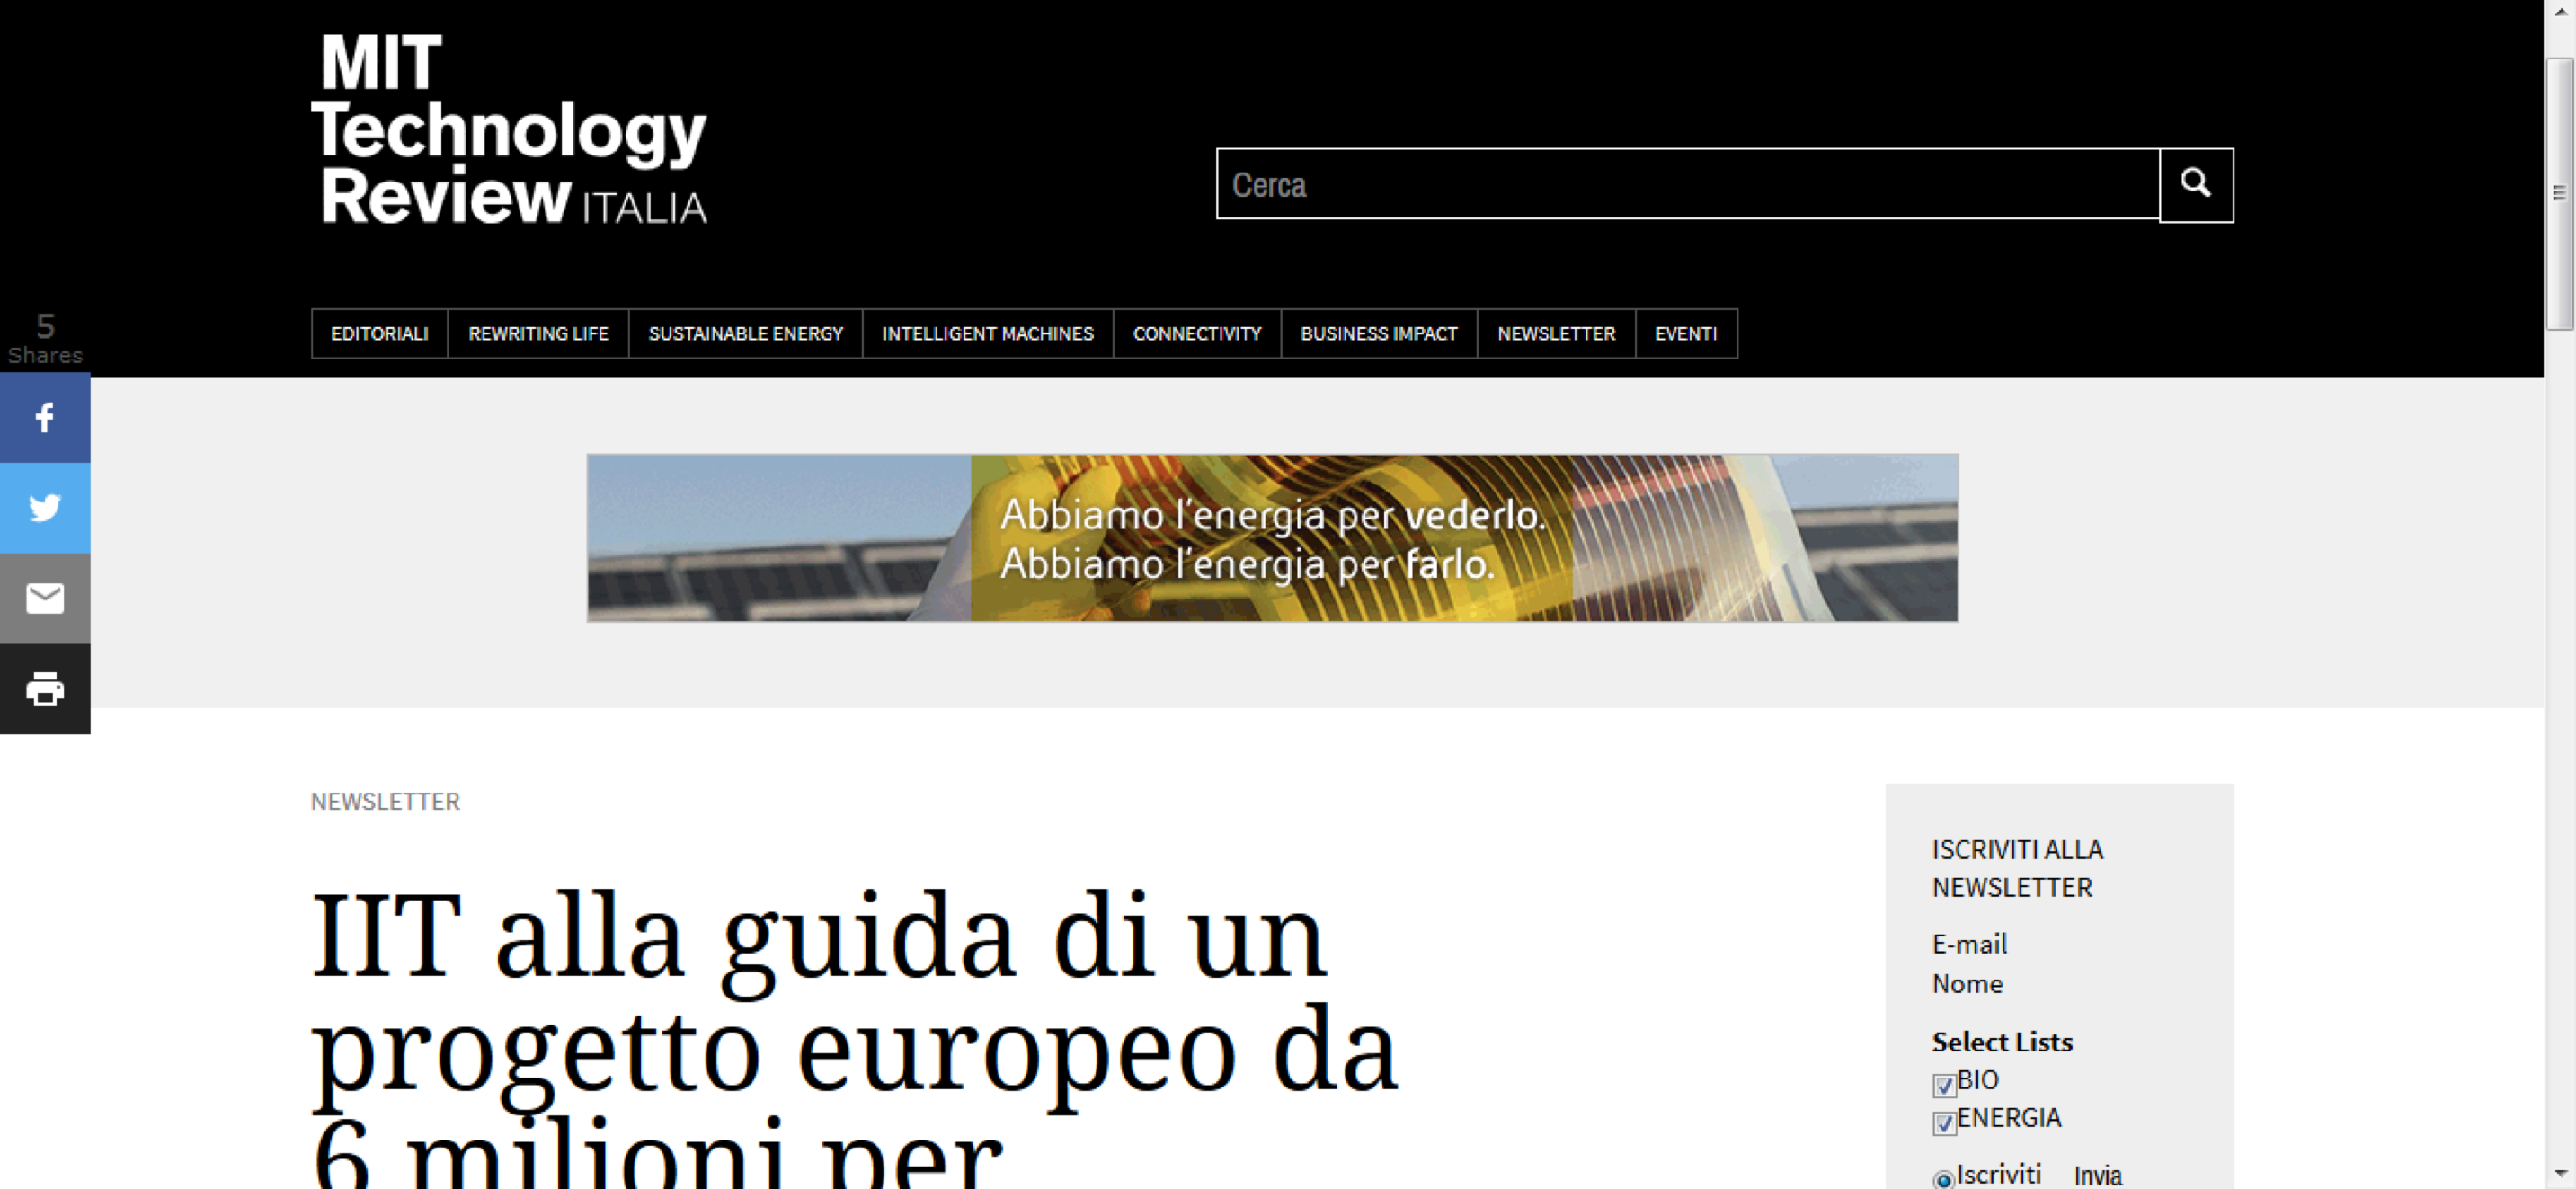 minded-press-review-mit-technology-review-italia